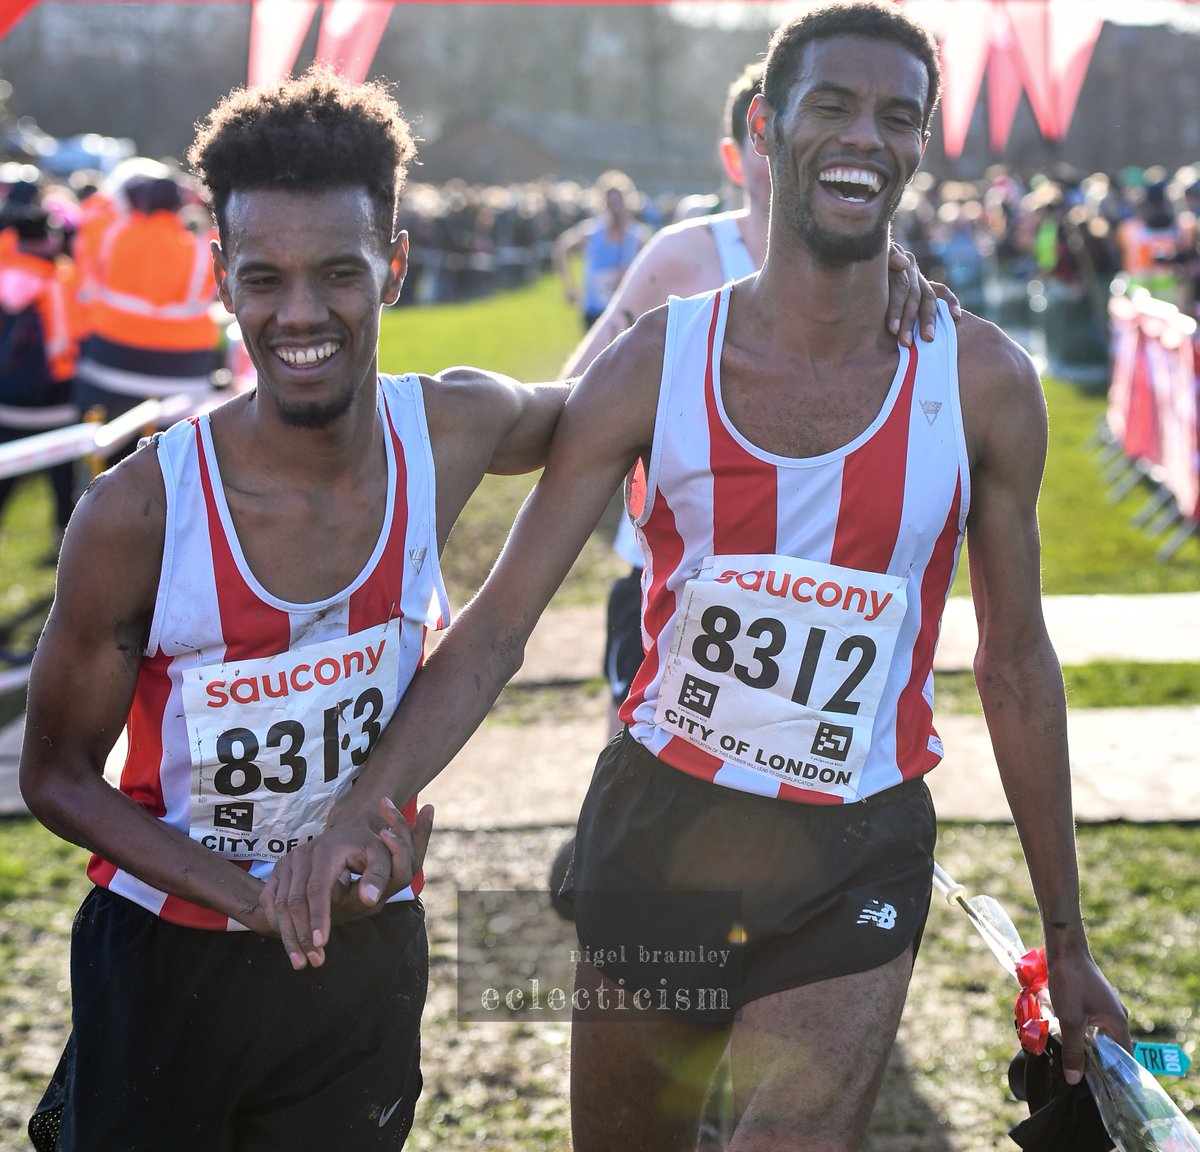 The English National Cross Country Championships today at Parliament Hill. Mahamed Mahamed (right) celebrates winning the title with brother Zak who finished fourth. @EnglandRunning @Mahamed1920